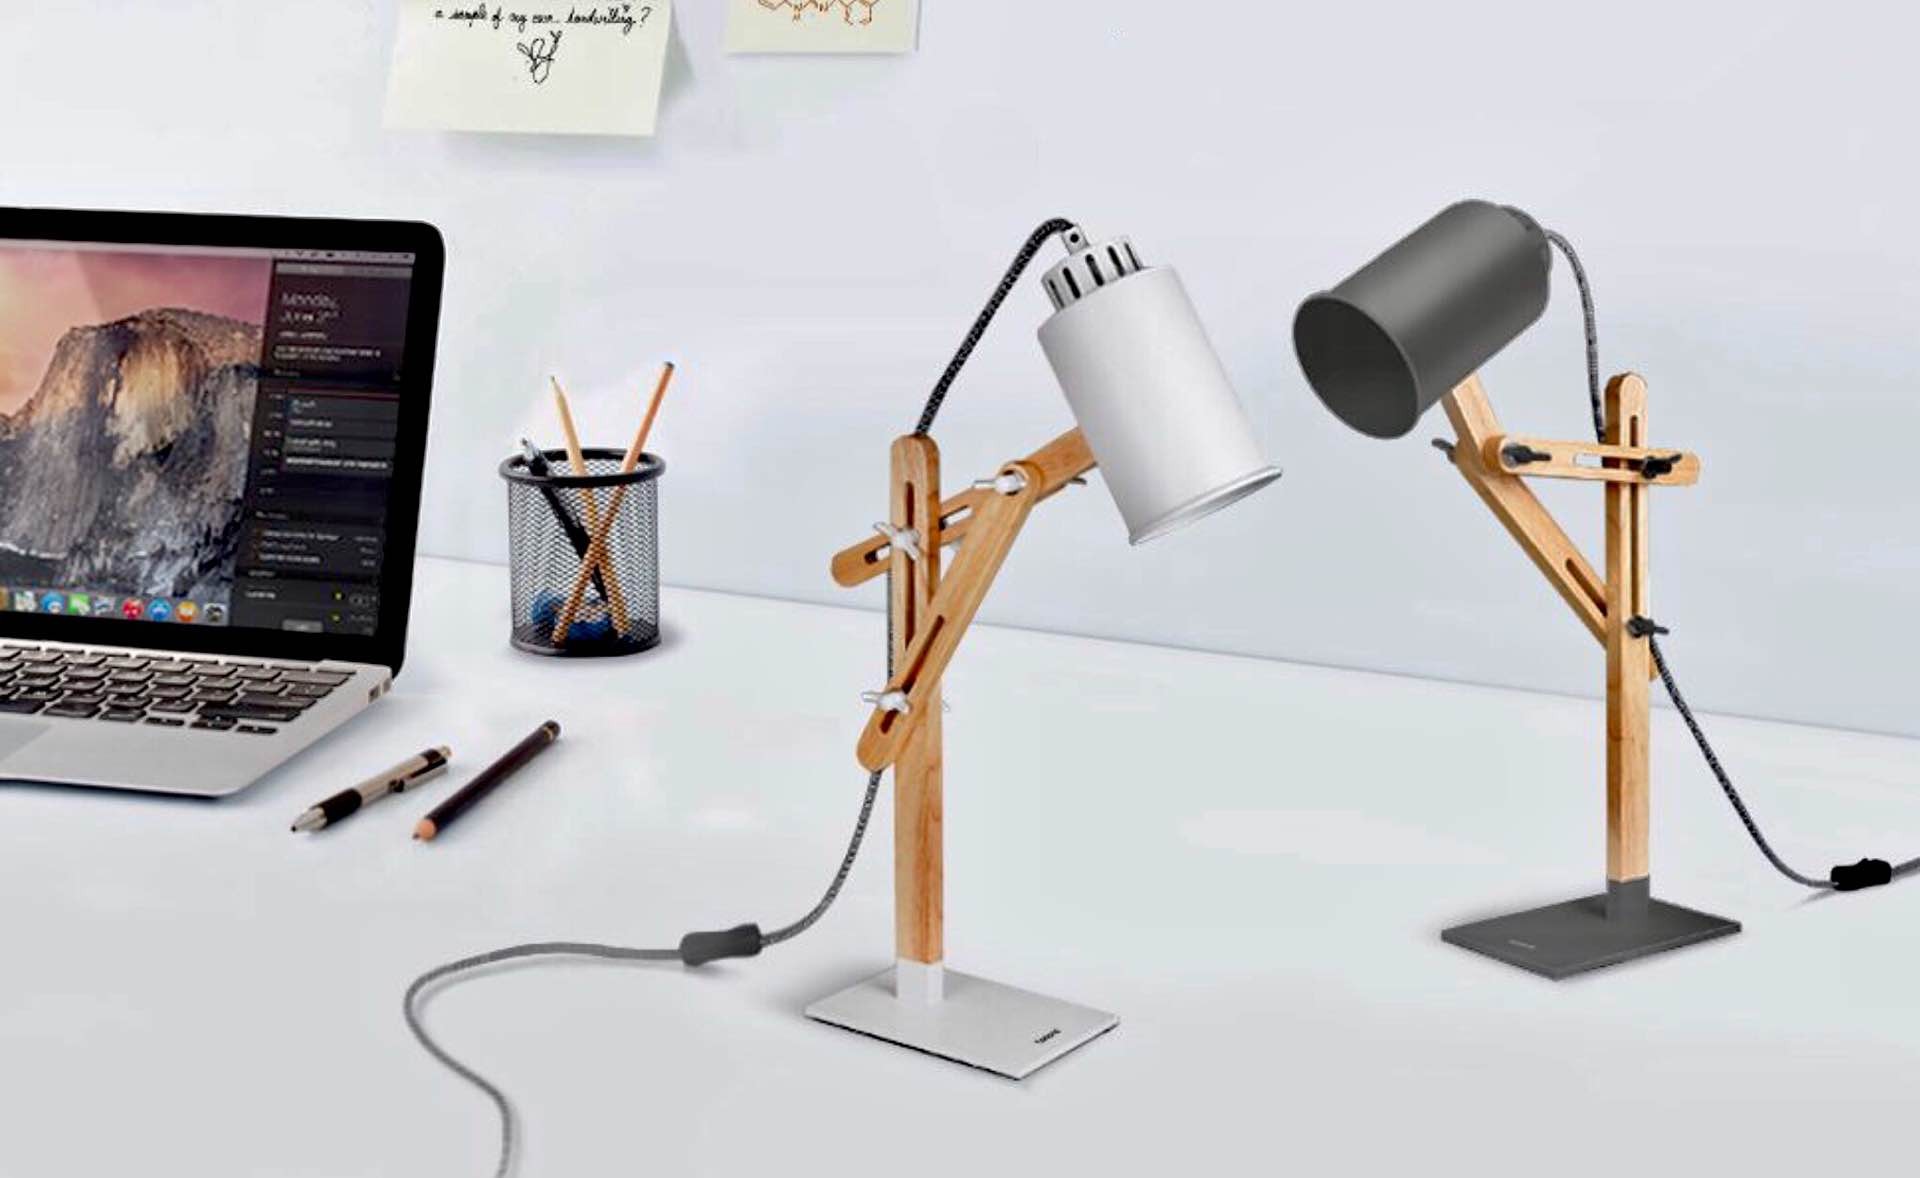 Tomons DL1005 LED desk lamp. ($40; available in white and gray)